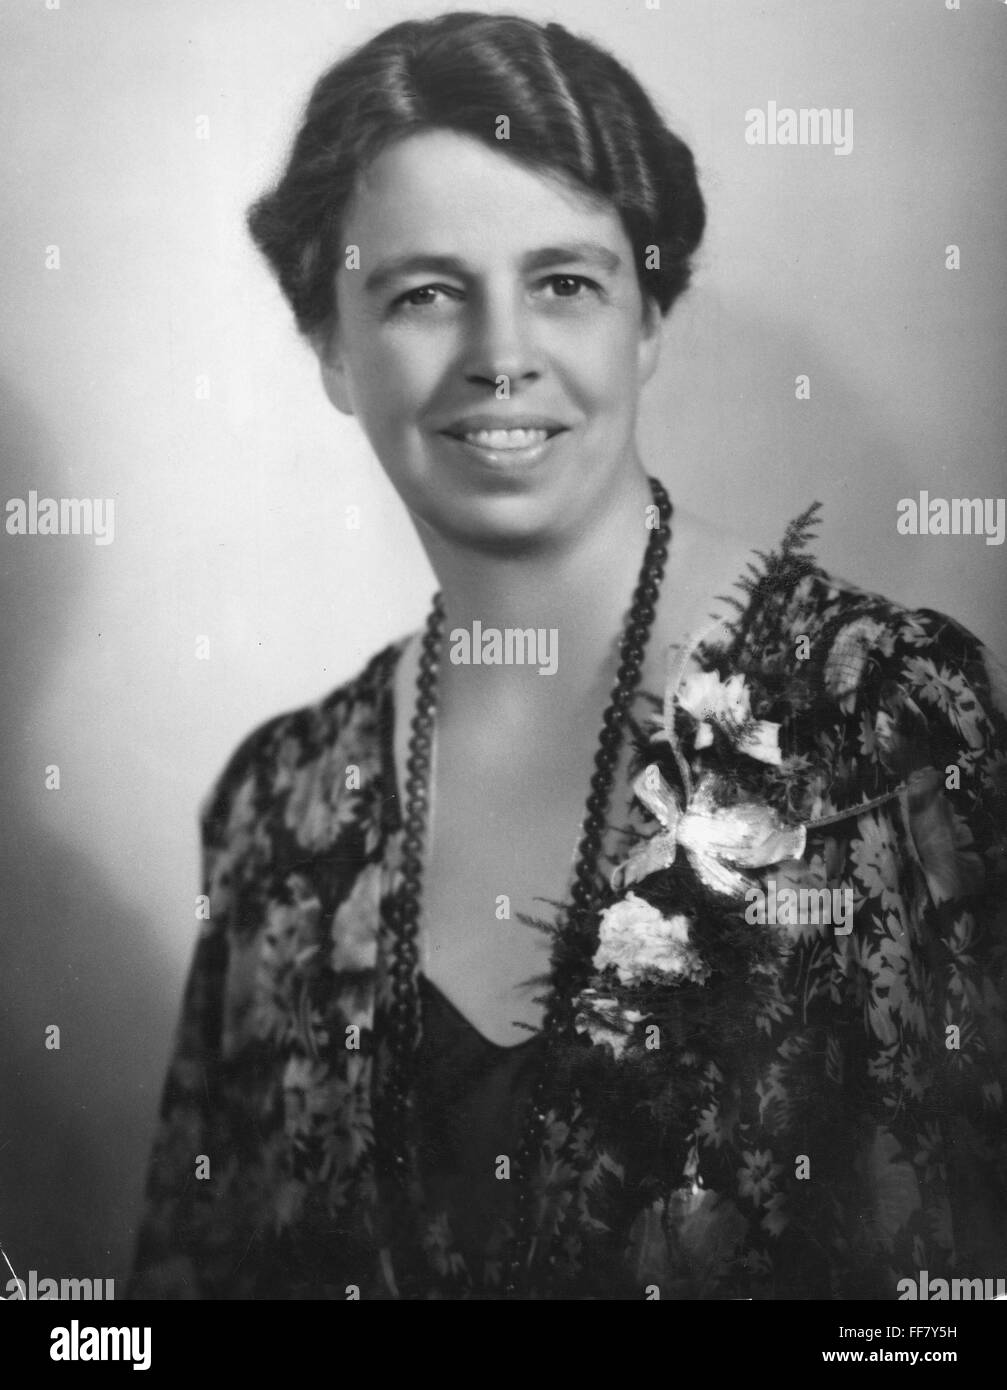 wife of Franklin Roosevelt First Lady Eleanor Roosevelt 6 Sizes! New Photo 